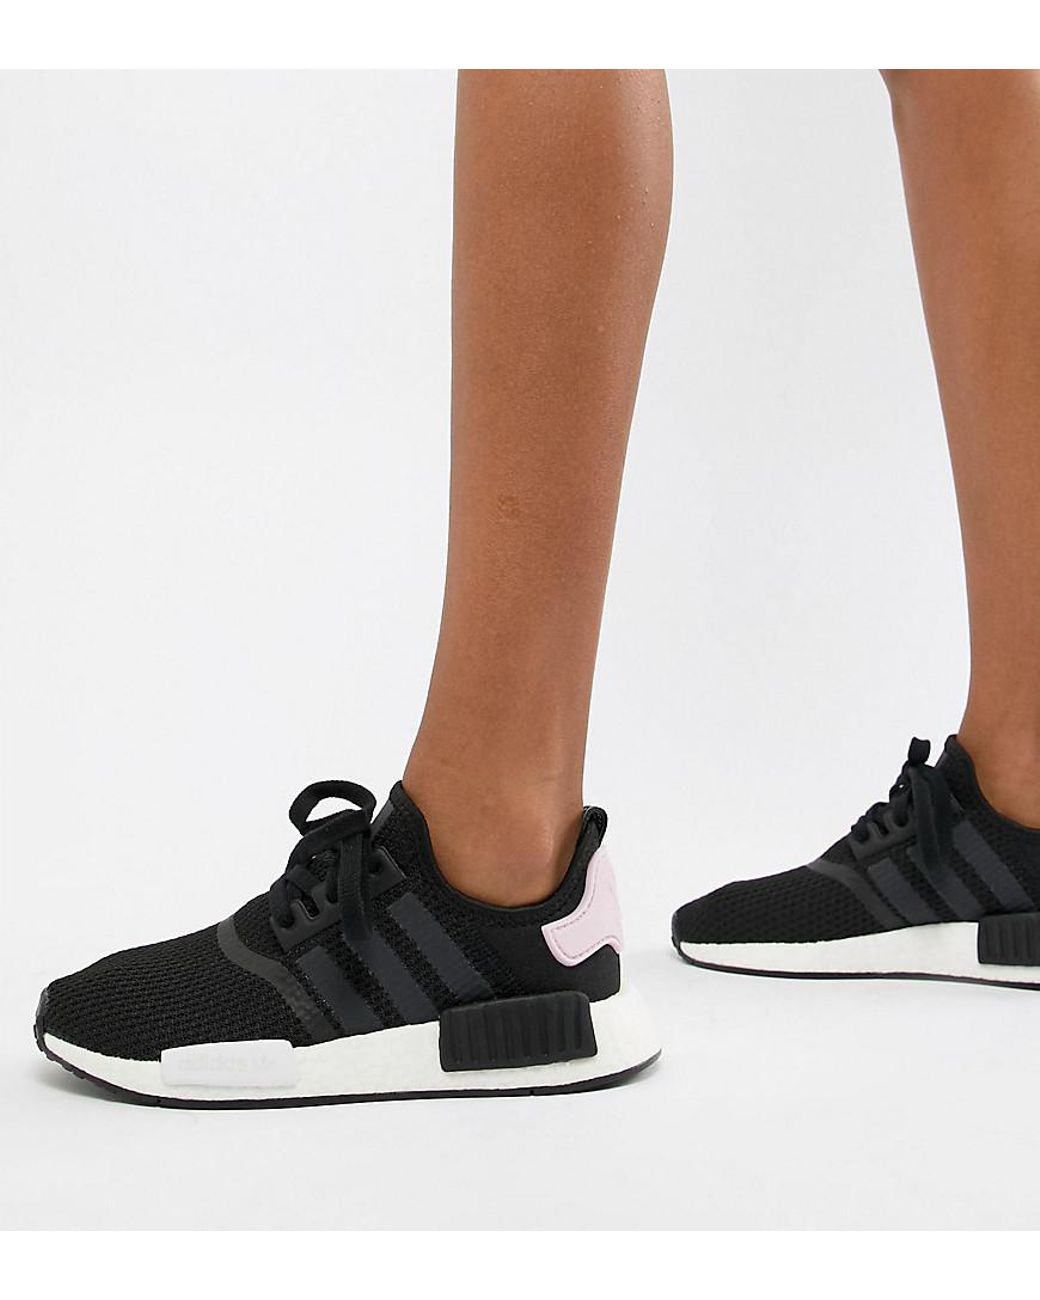 adidas Originals Nmd Sneakers In Black And Pink | Lyst